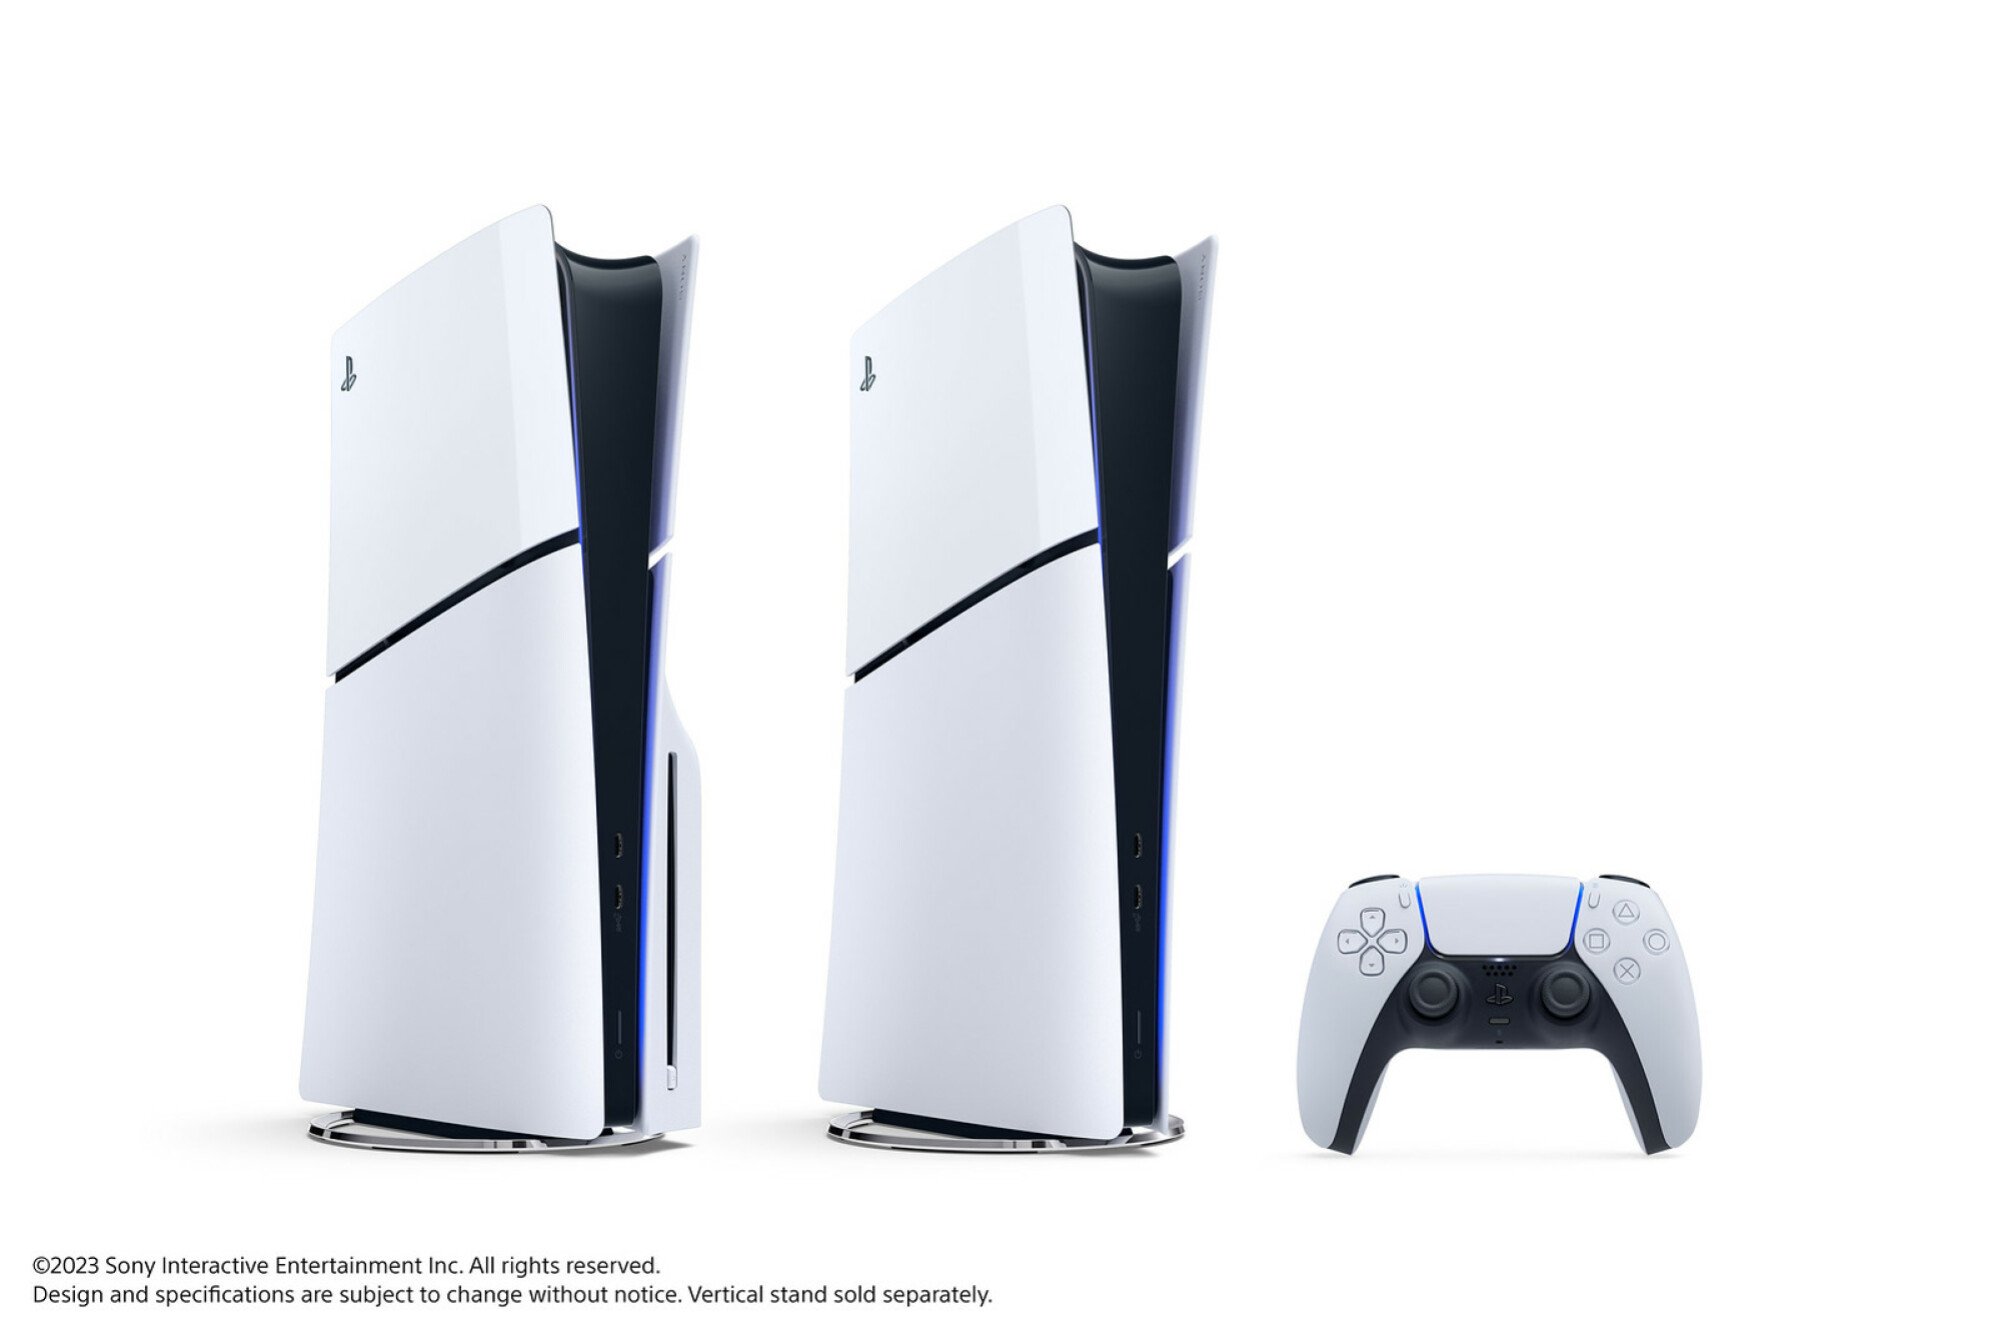 Two PS5 Slim models